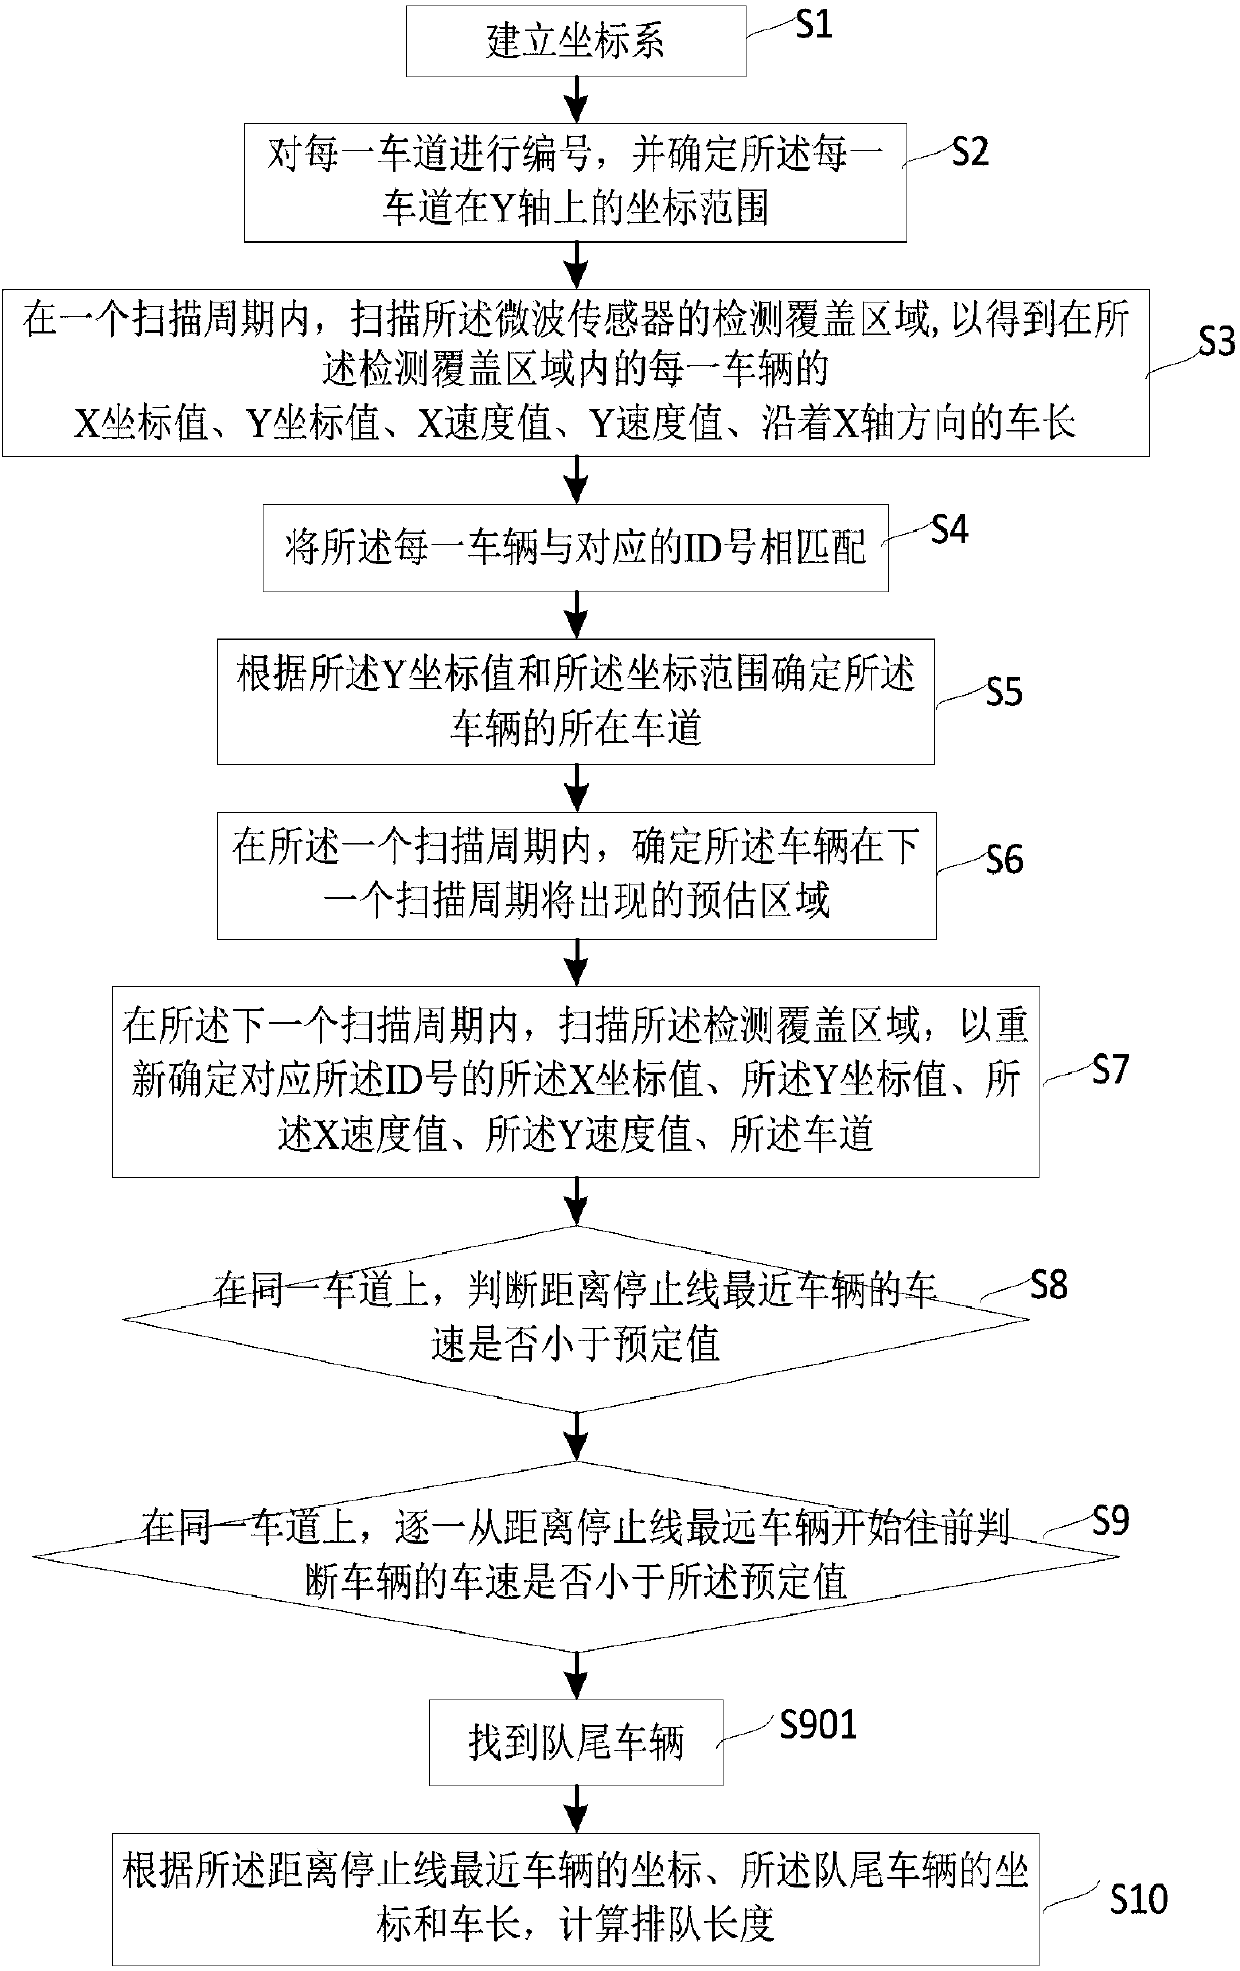 Microwave-based vehicle queuing length detection method and system